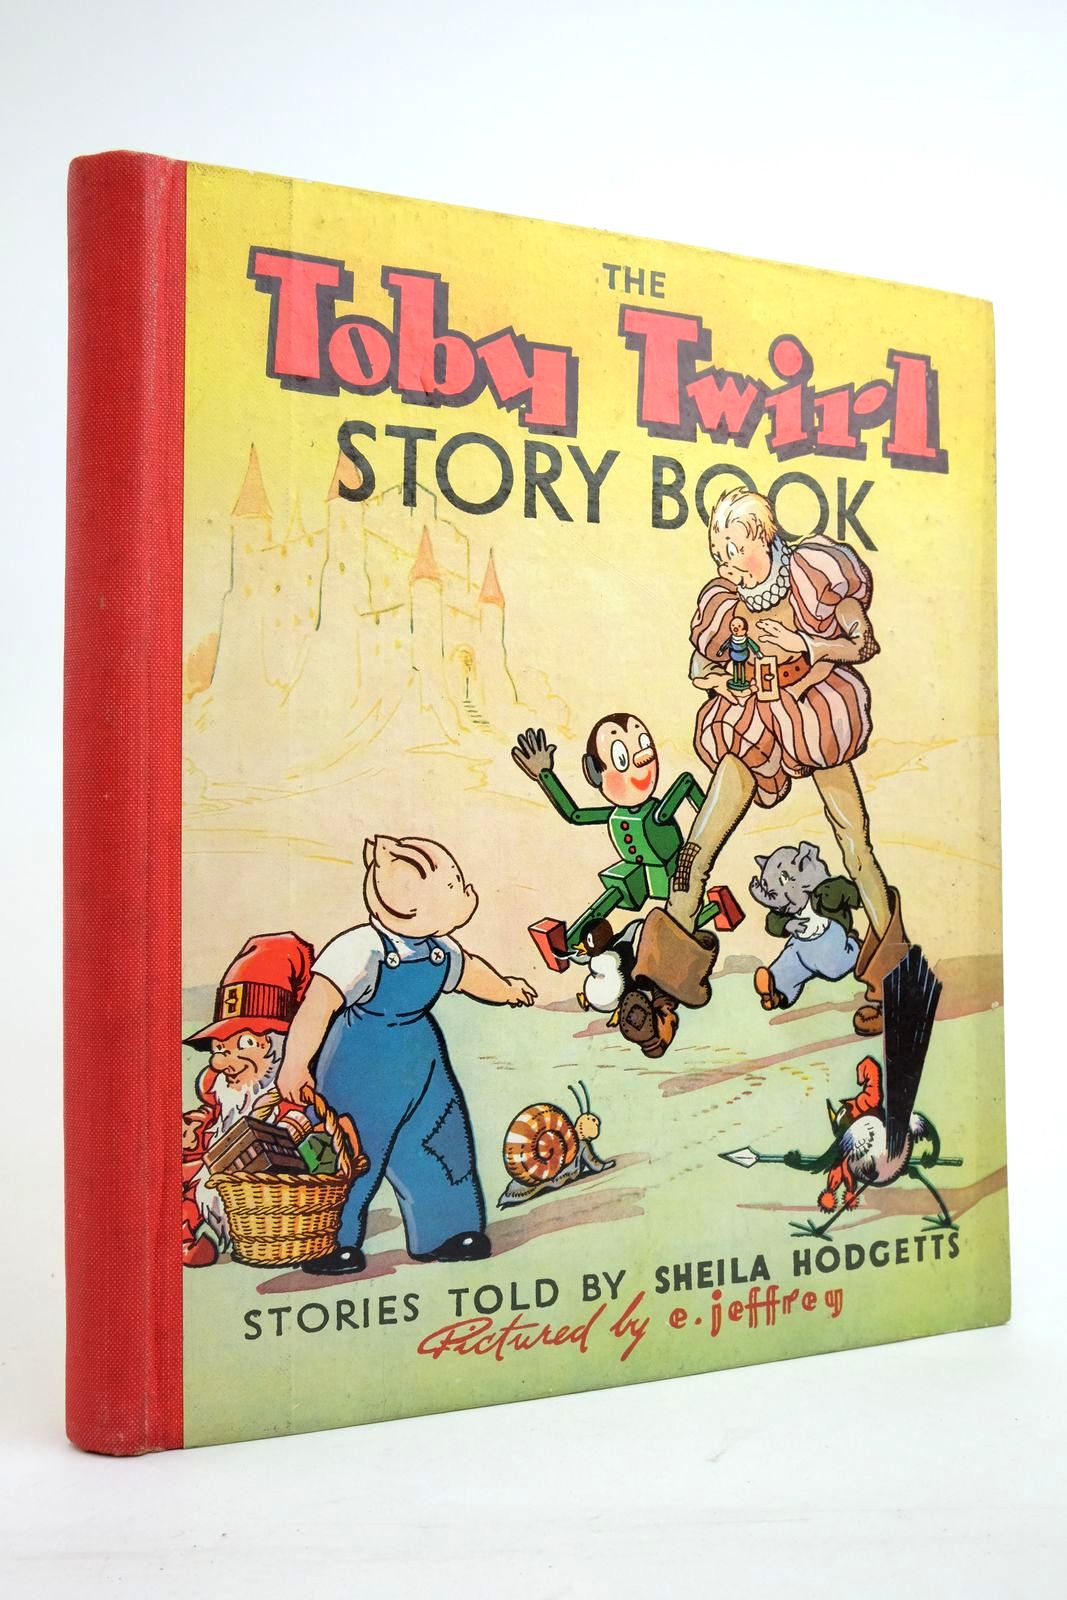 Photo of THE TOBY TWIRL STORY BOOK written by Hodgetts, Sheila illustrated by Jeffrey, E. published by Sampson Low, Marston & Co. Ltd. (STOCK CODE: 2136175)  for sale by Stella & Rose's Books